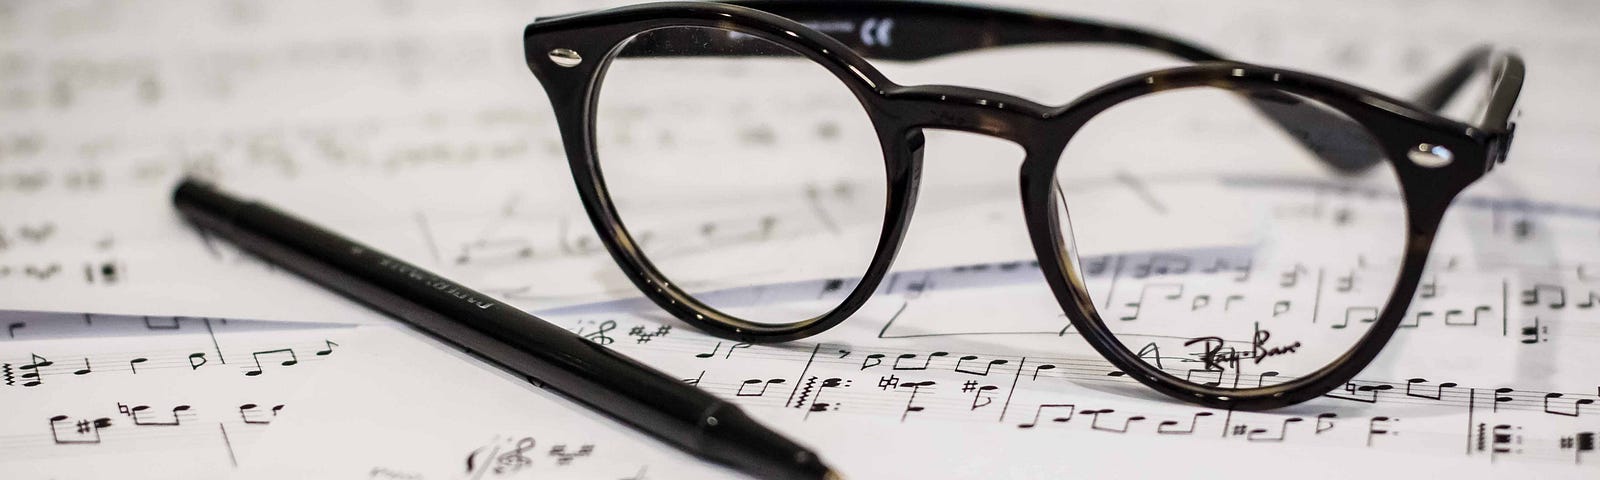 Eyeglasses, a pen, and music scores